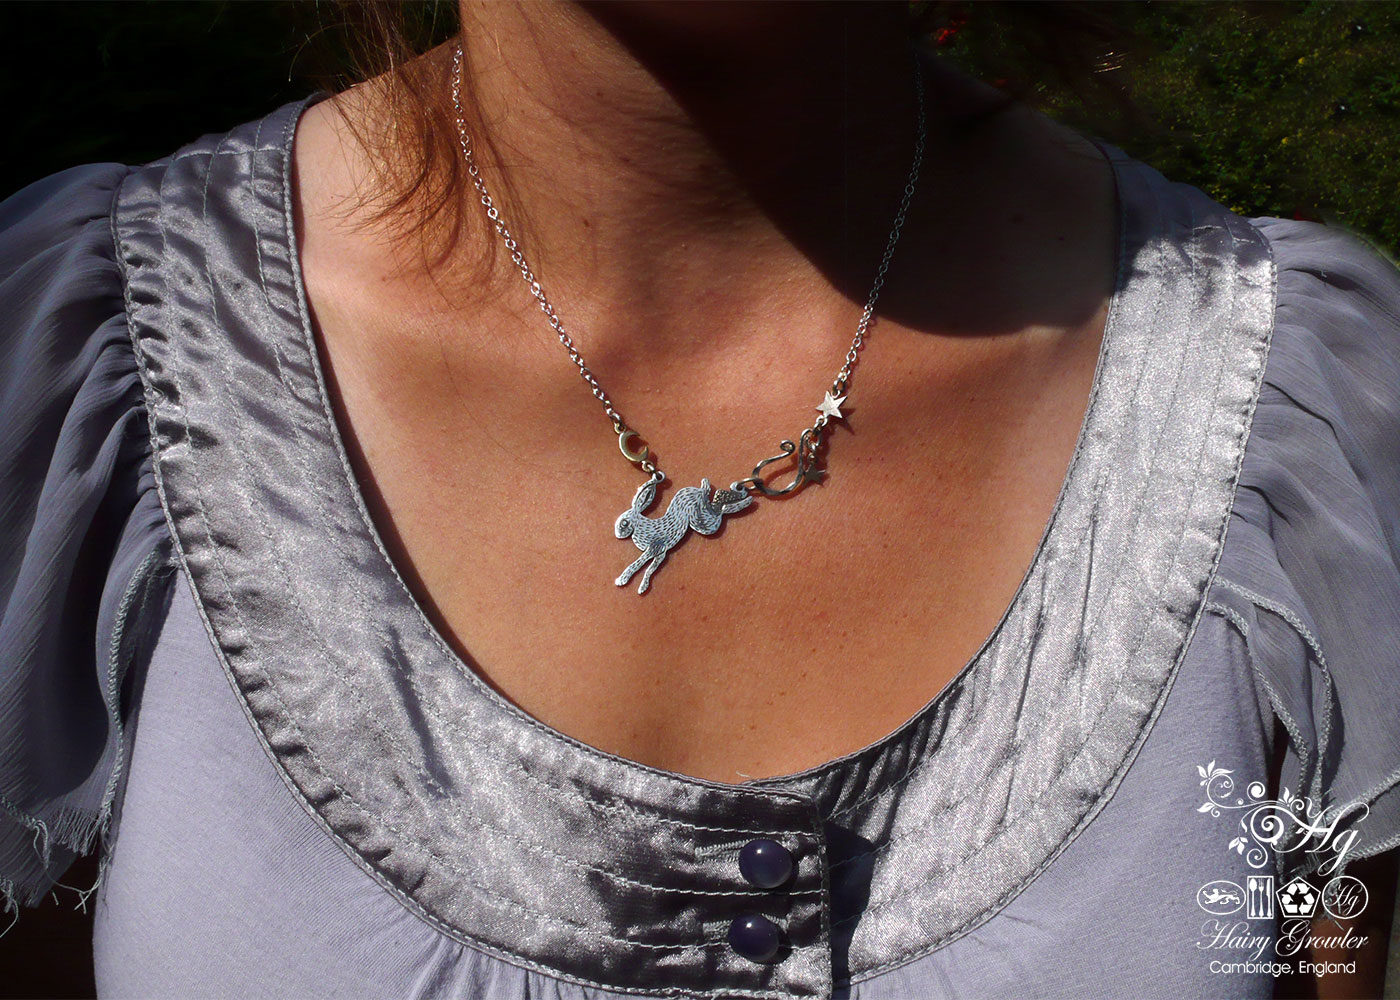 Handmade and upcycled sterling silver moon leaping hare necklace